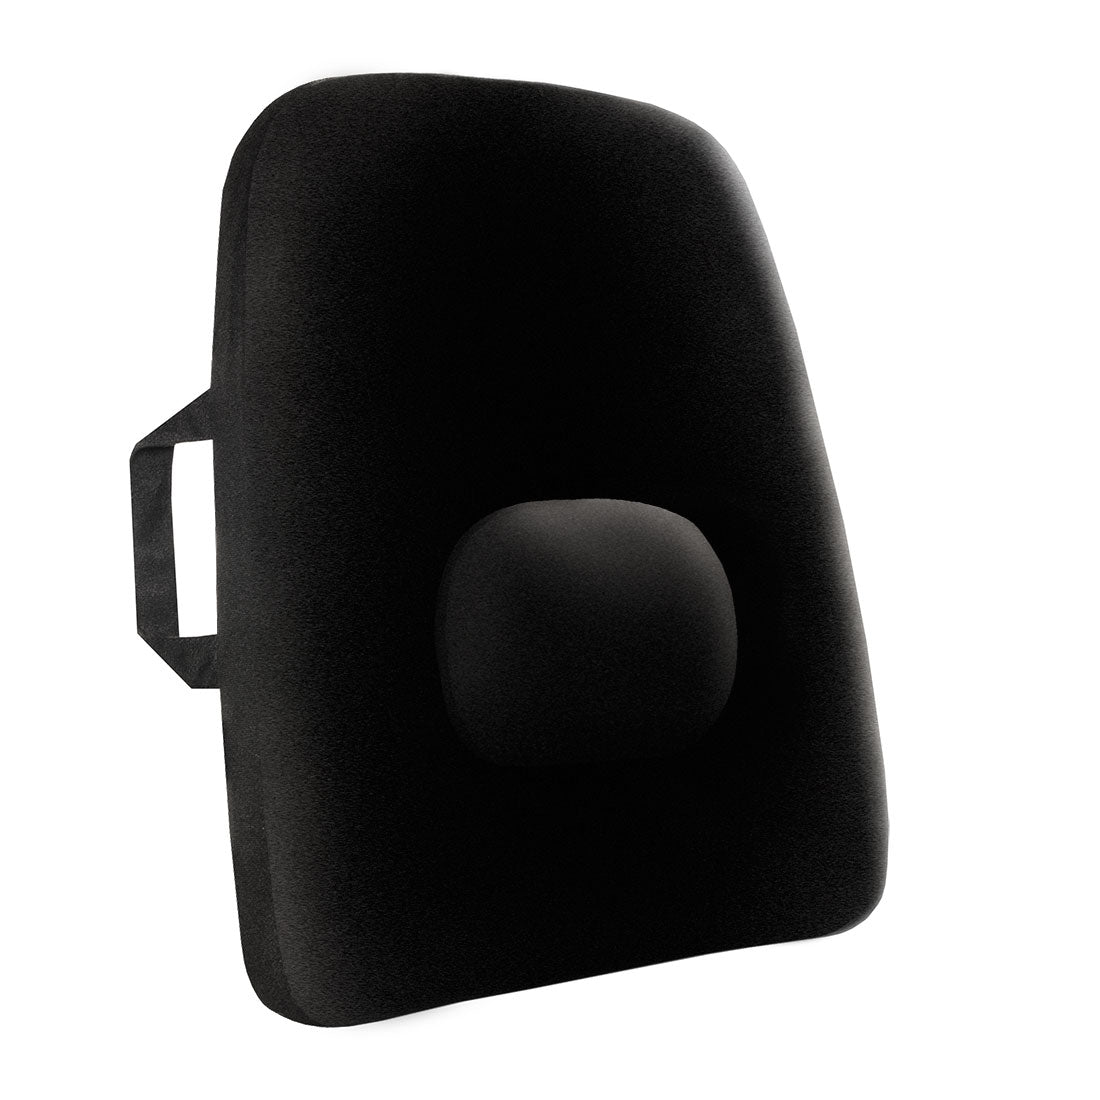 Full Backrest Cushion with Adjustable Lumbar Support - Back Support